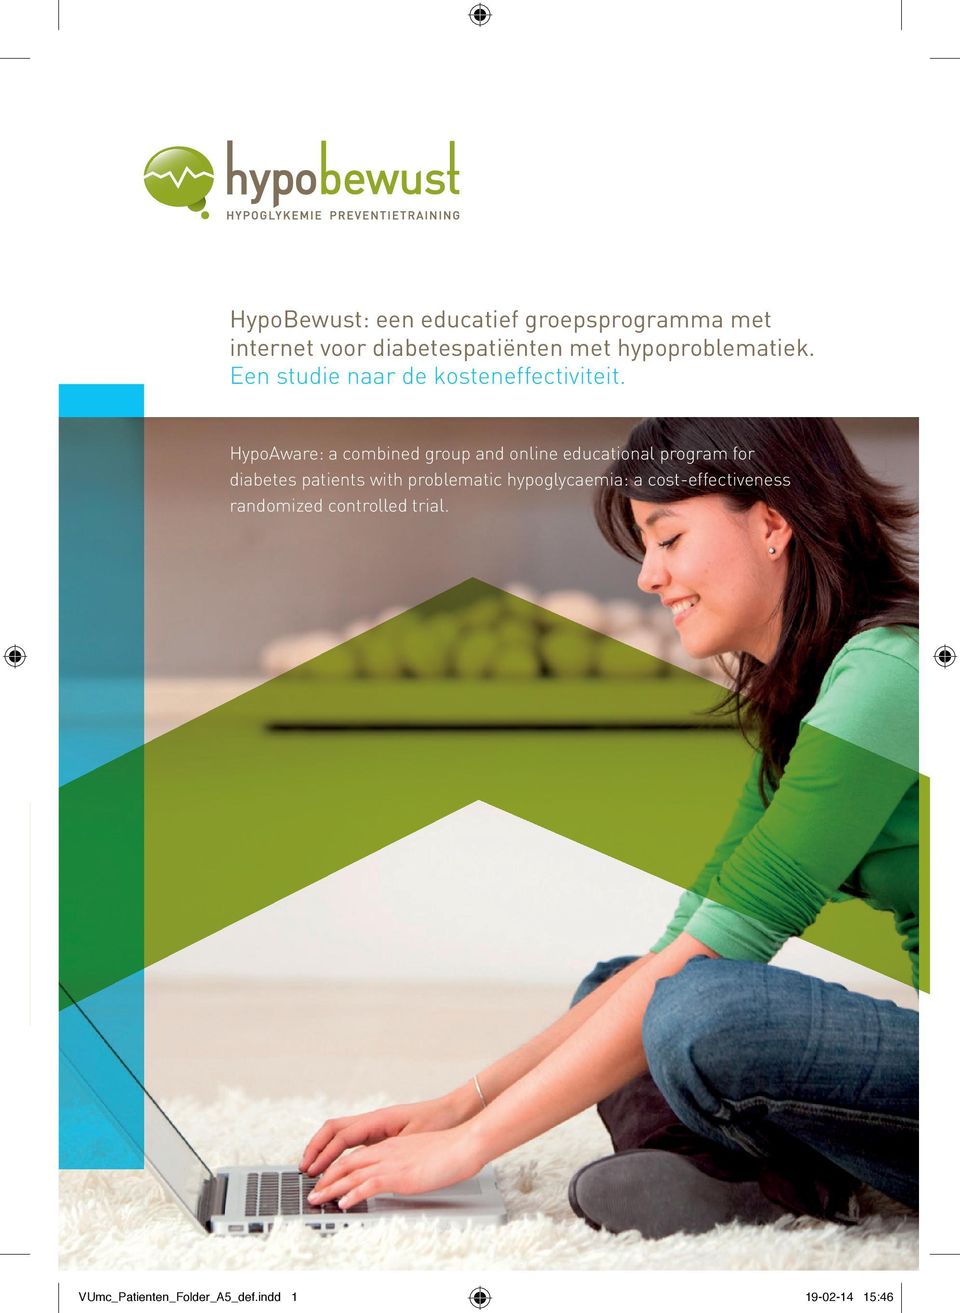 HypoAware: a combined group and online educational program for diabetes patients with